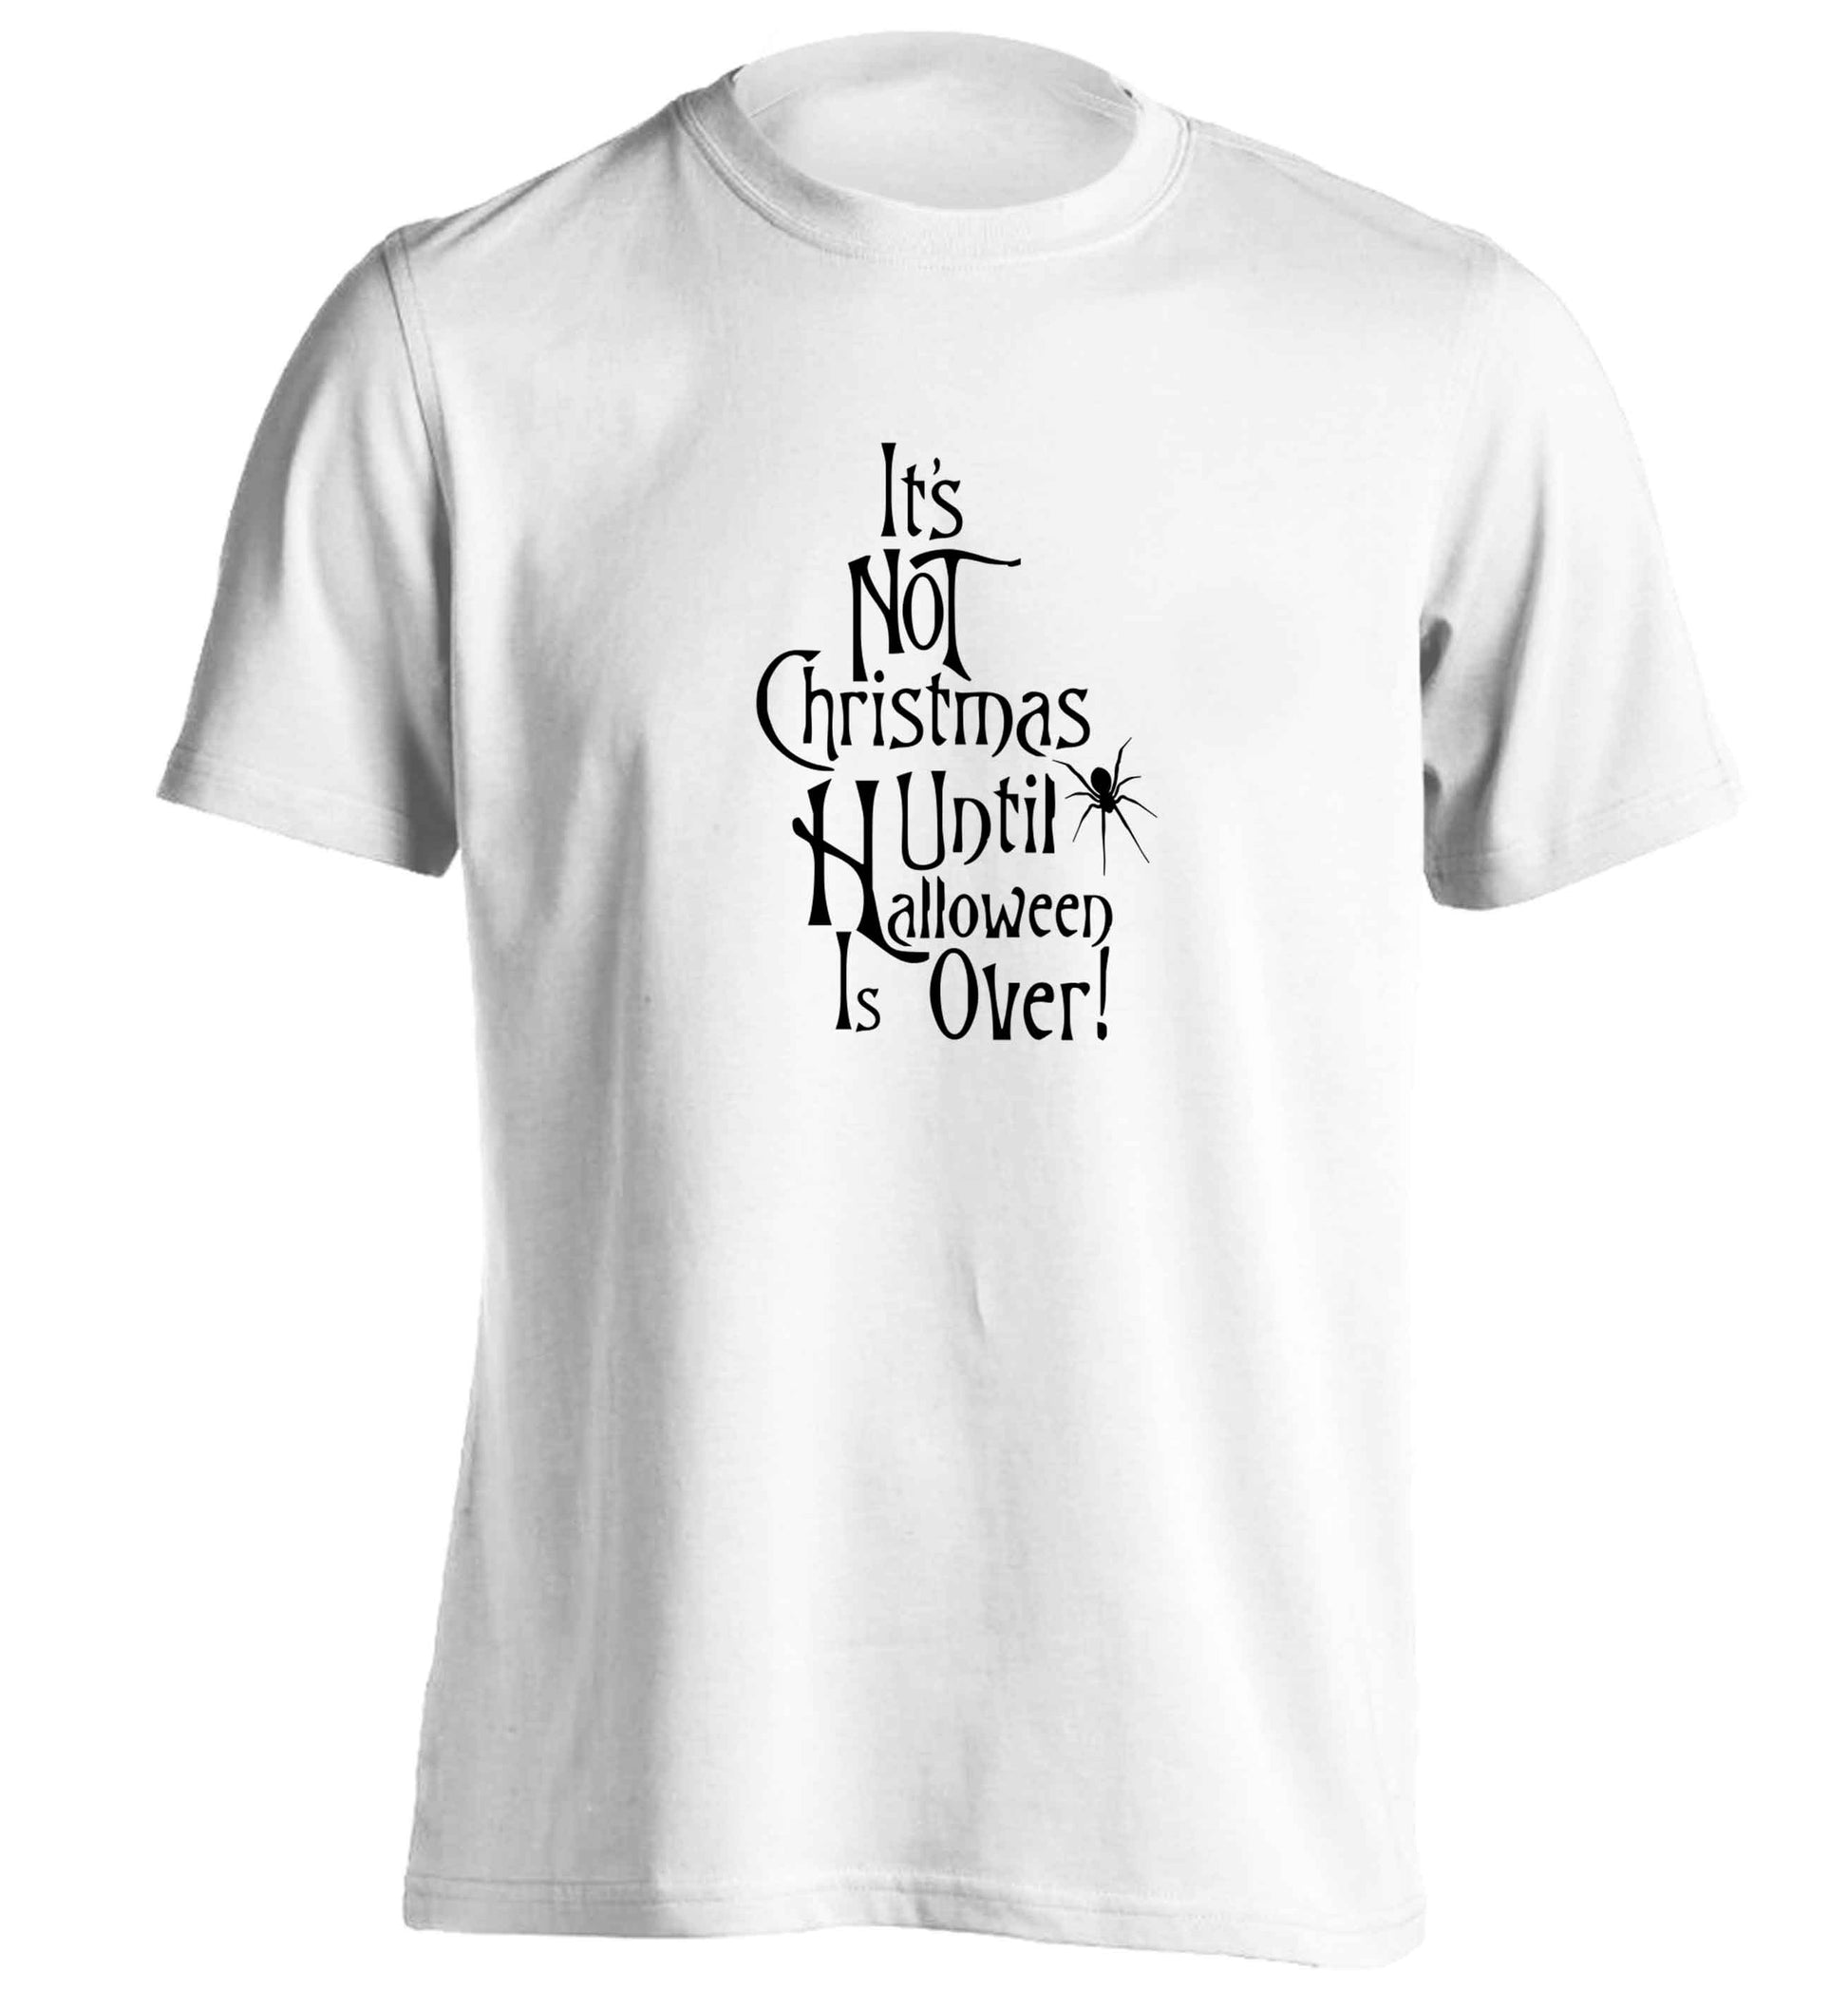 It's not Christmas until Halloween is over adults unisex white Tshirt 2XL